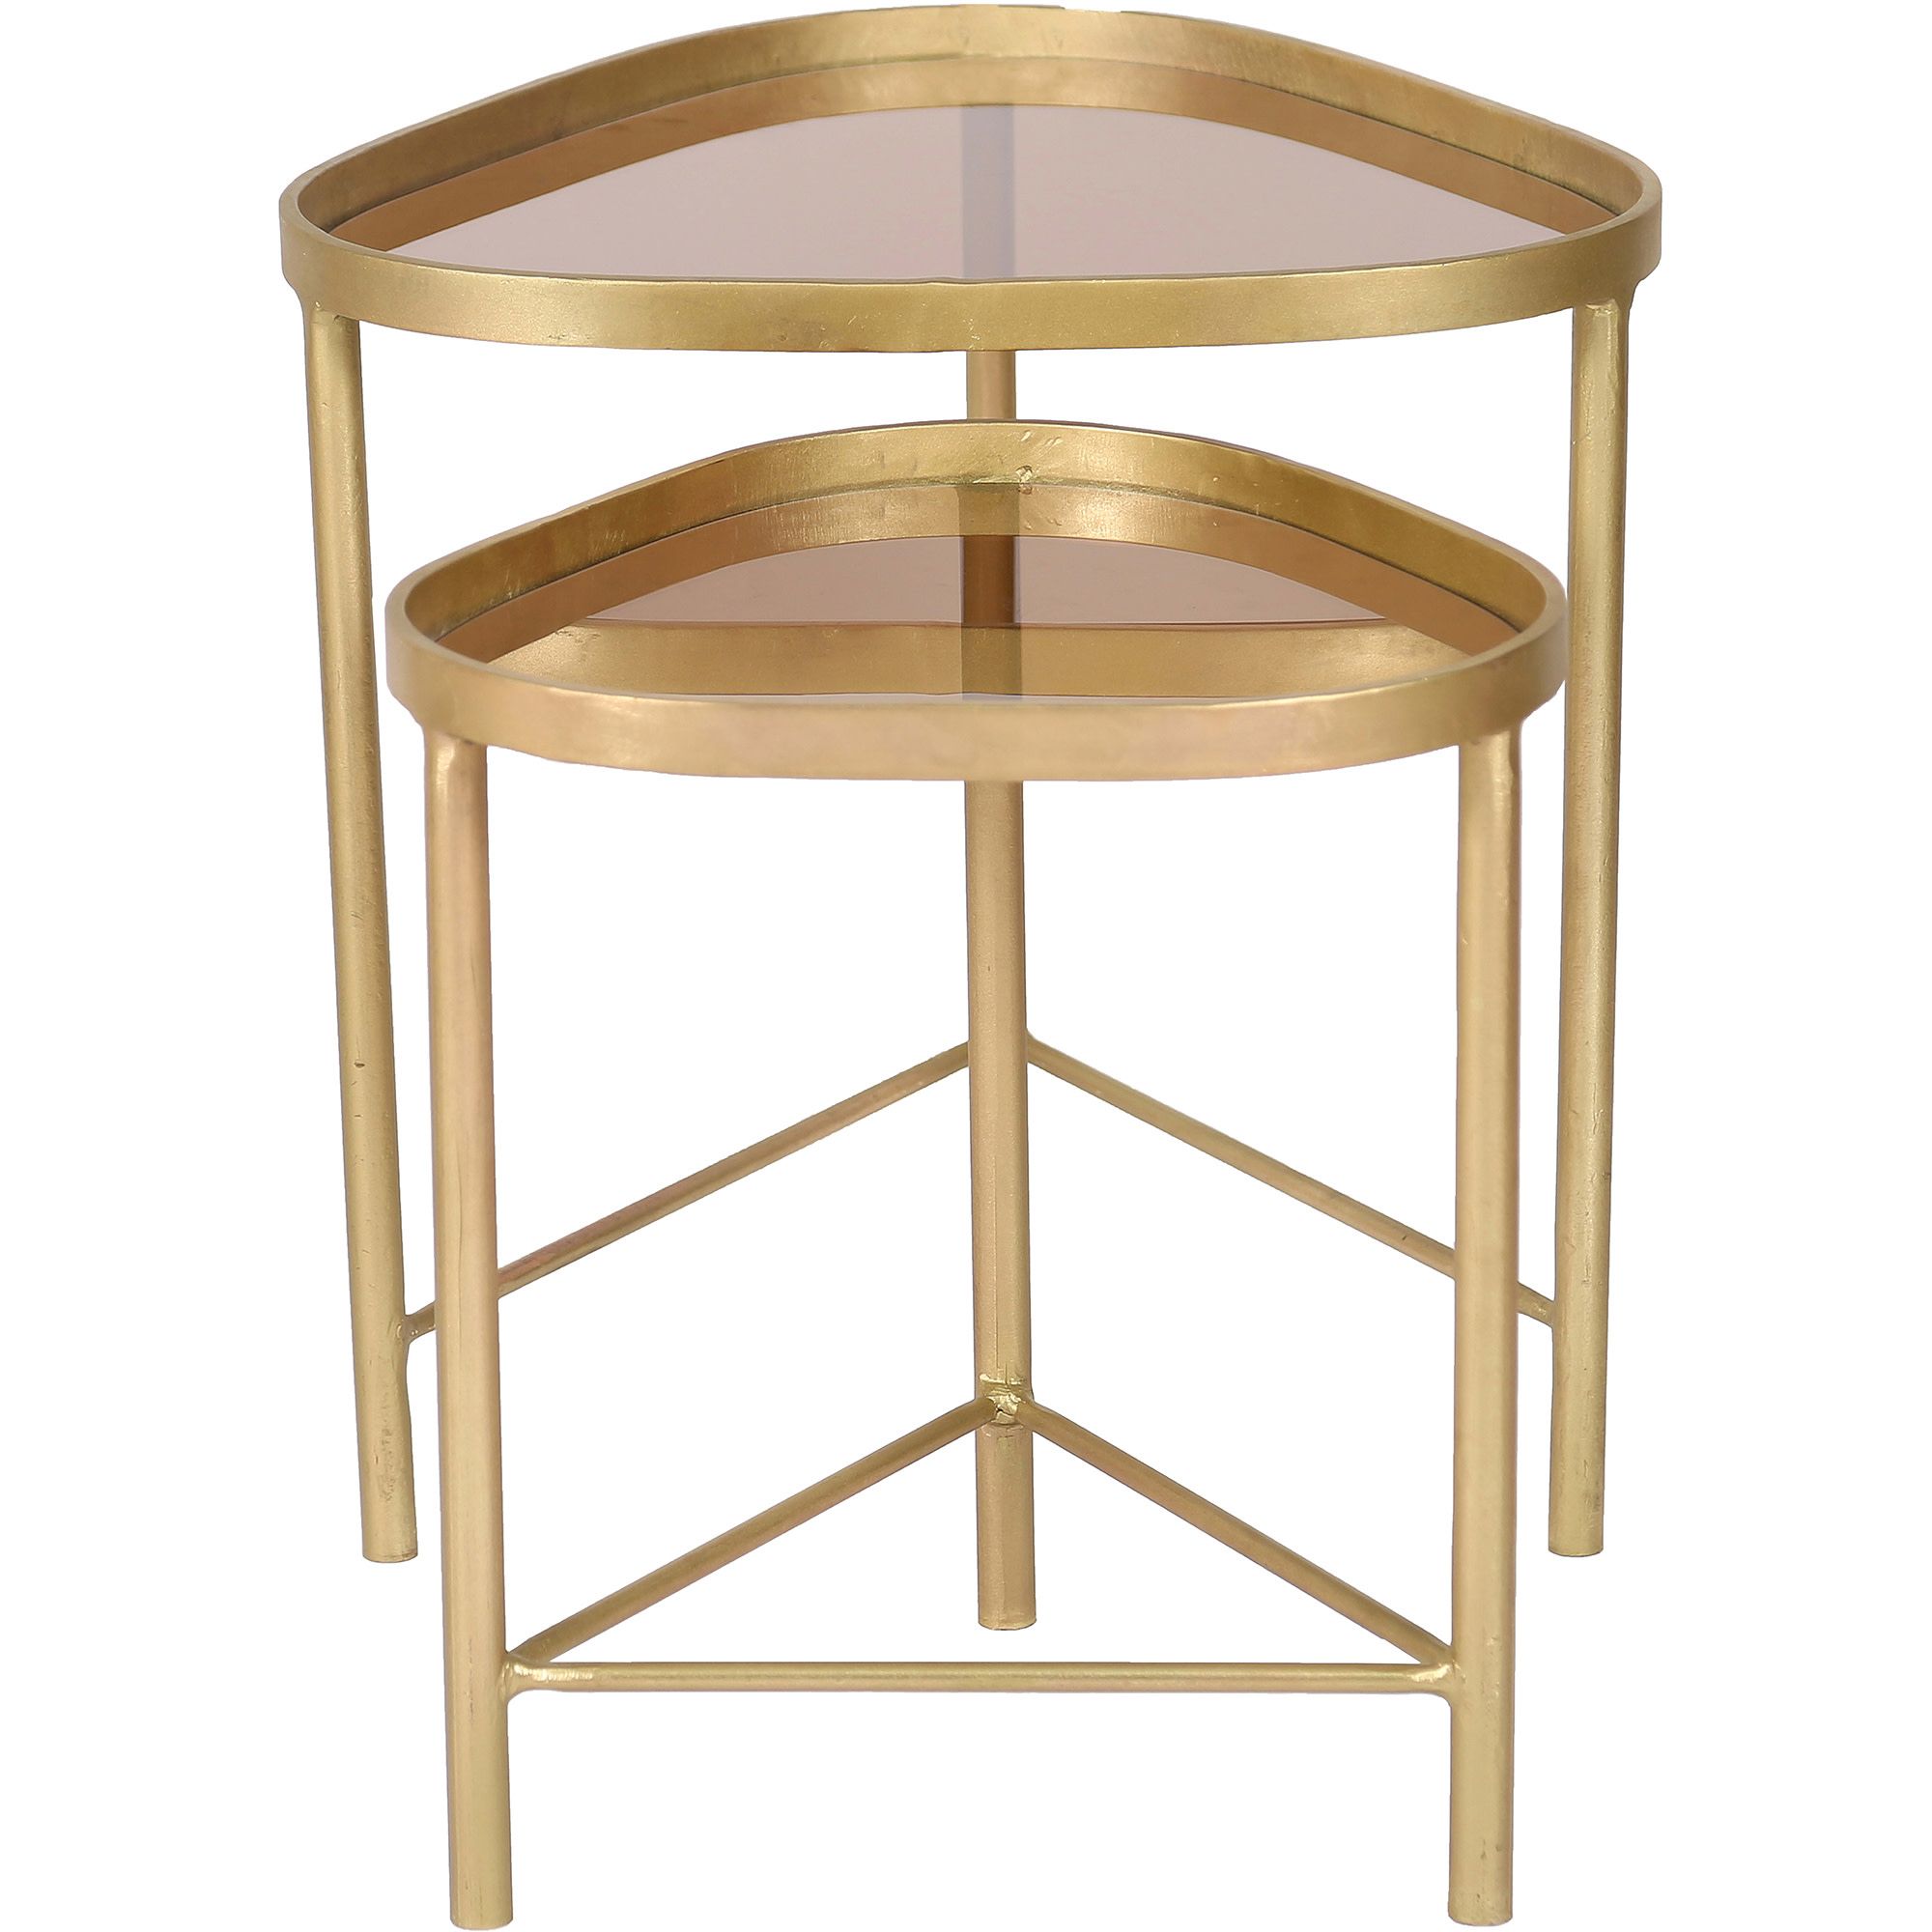 Ren Wil Ta267 Comete Set Of 2 – Modern Iron Accent Tables – Brass | Ebay Inside Triangular Indoor Outdoor Nesting Tables (View 2 of 15)